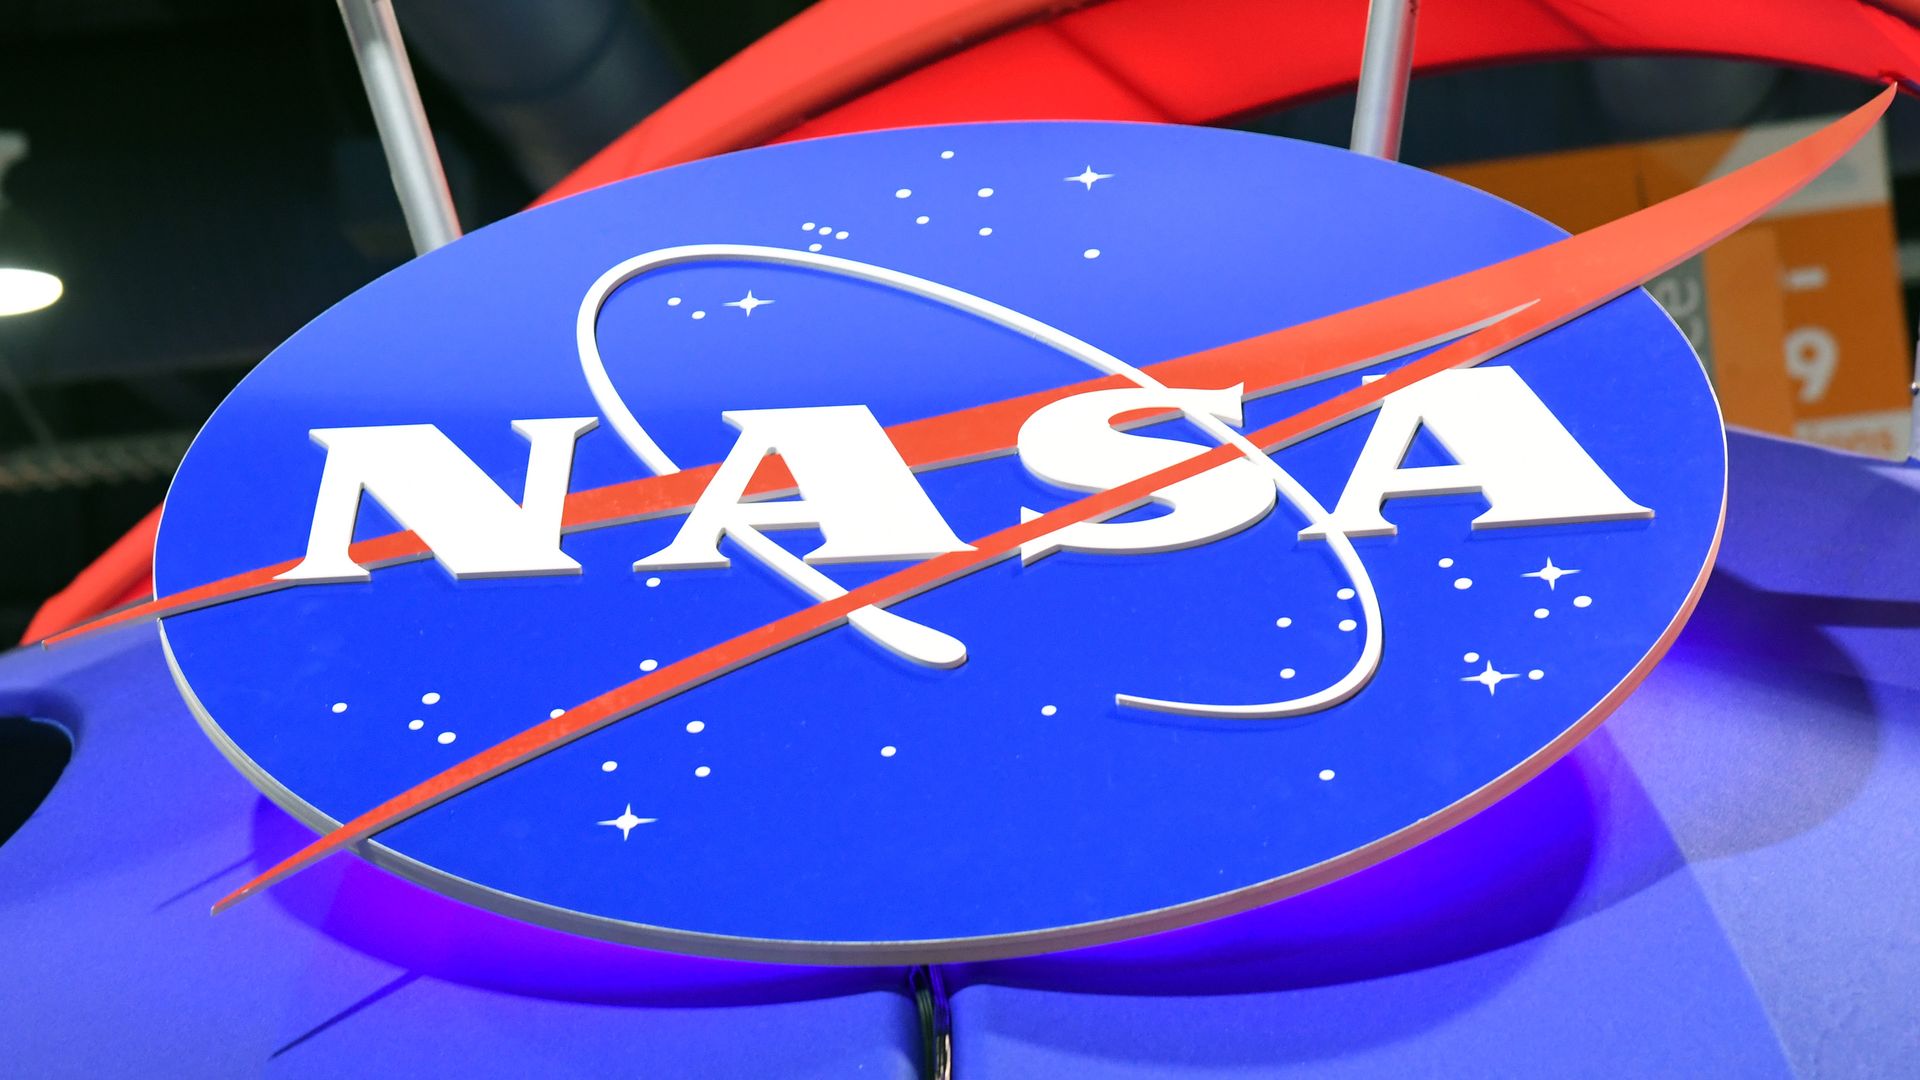 In this image, the NASA logo is displayed